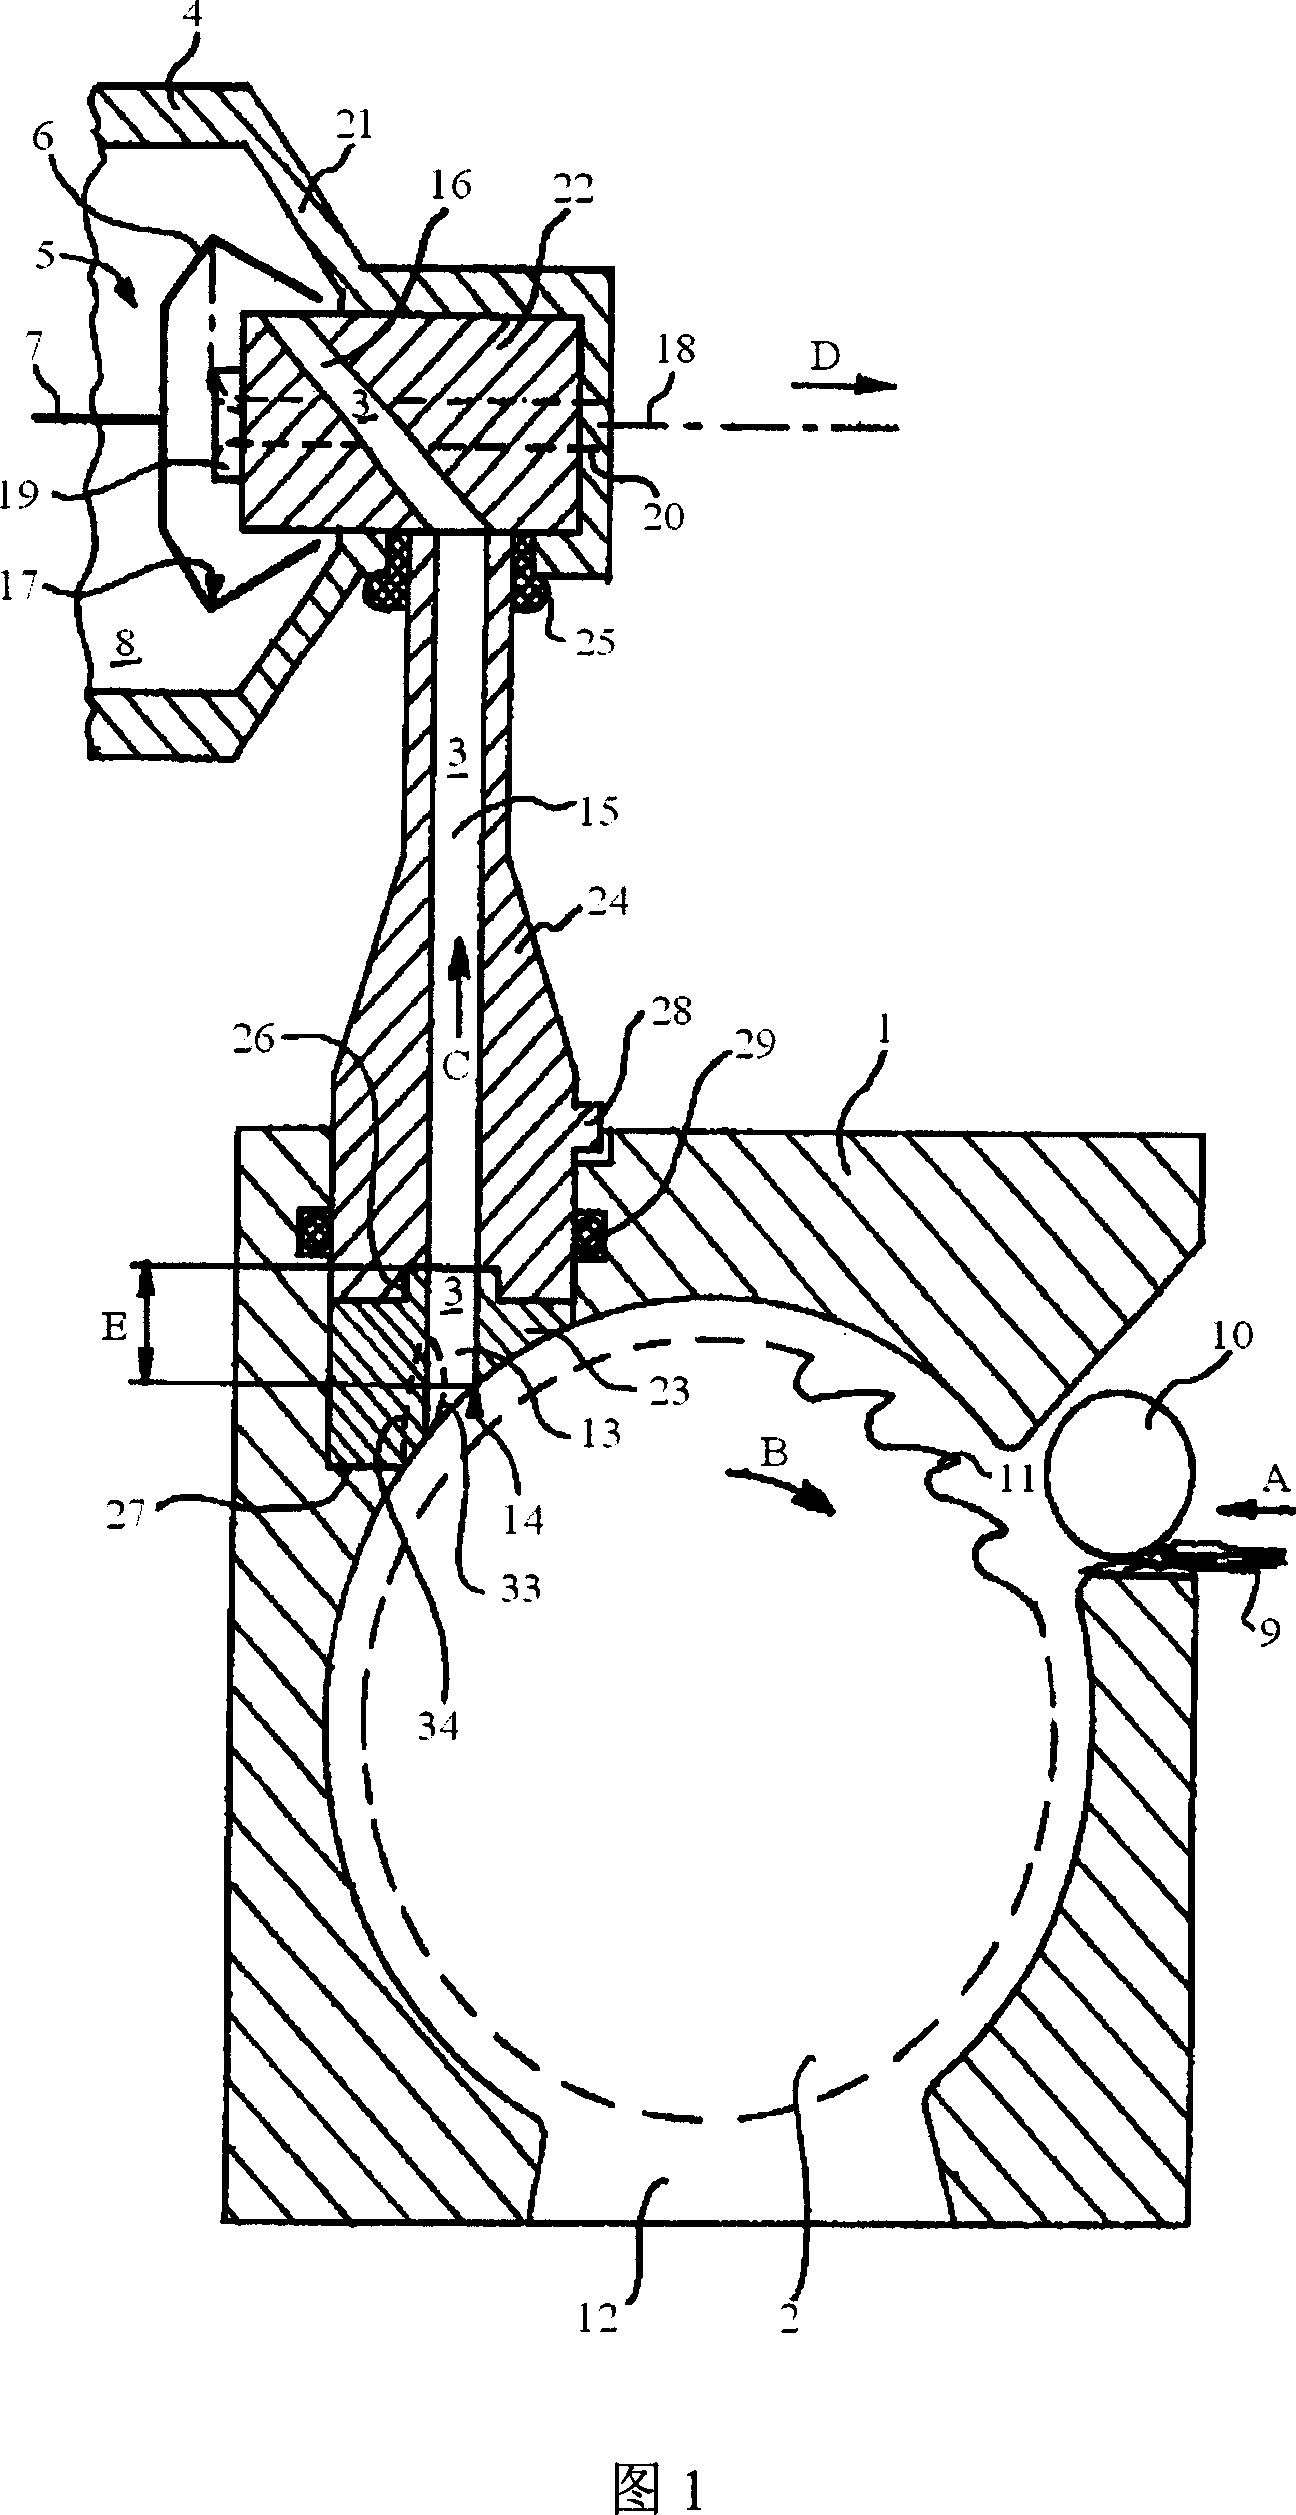 Open-end spinning apparatus with fiber transport channel consisting of several channel structural components